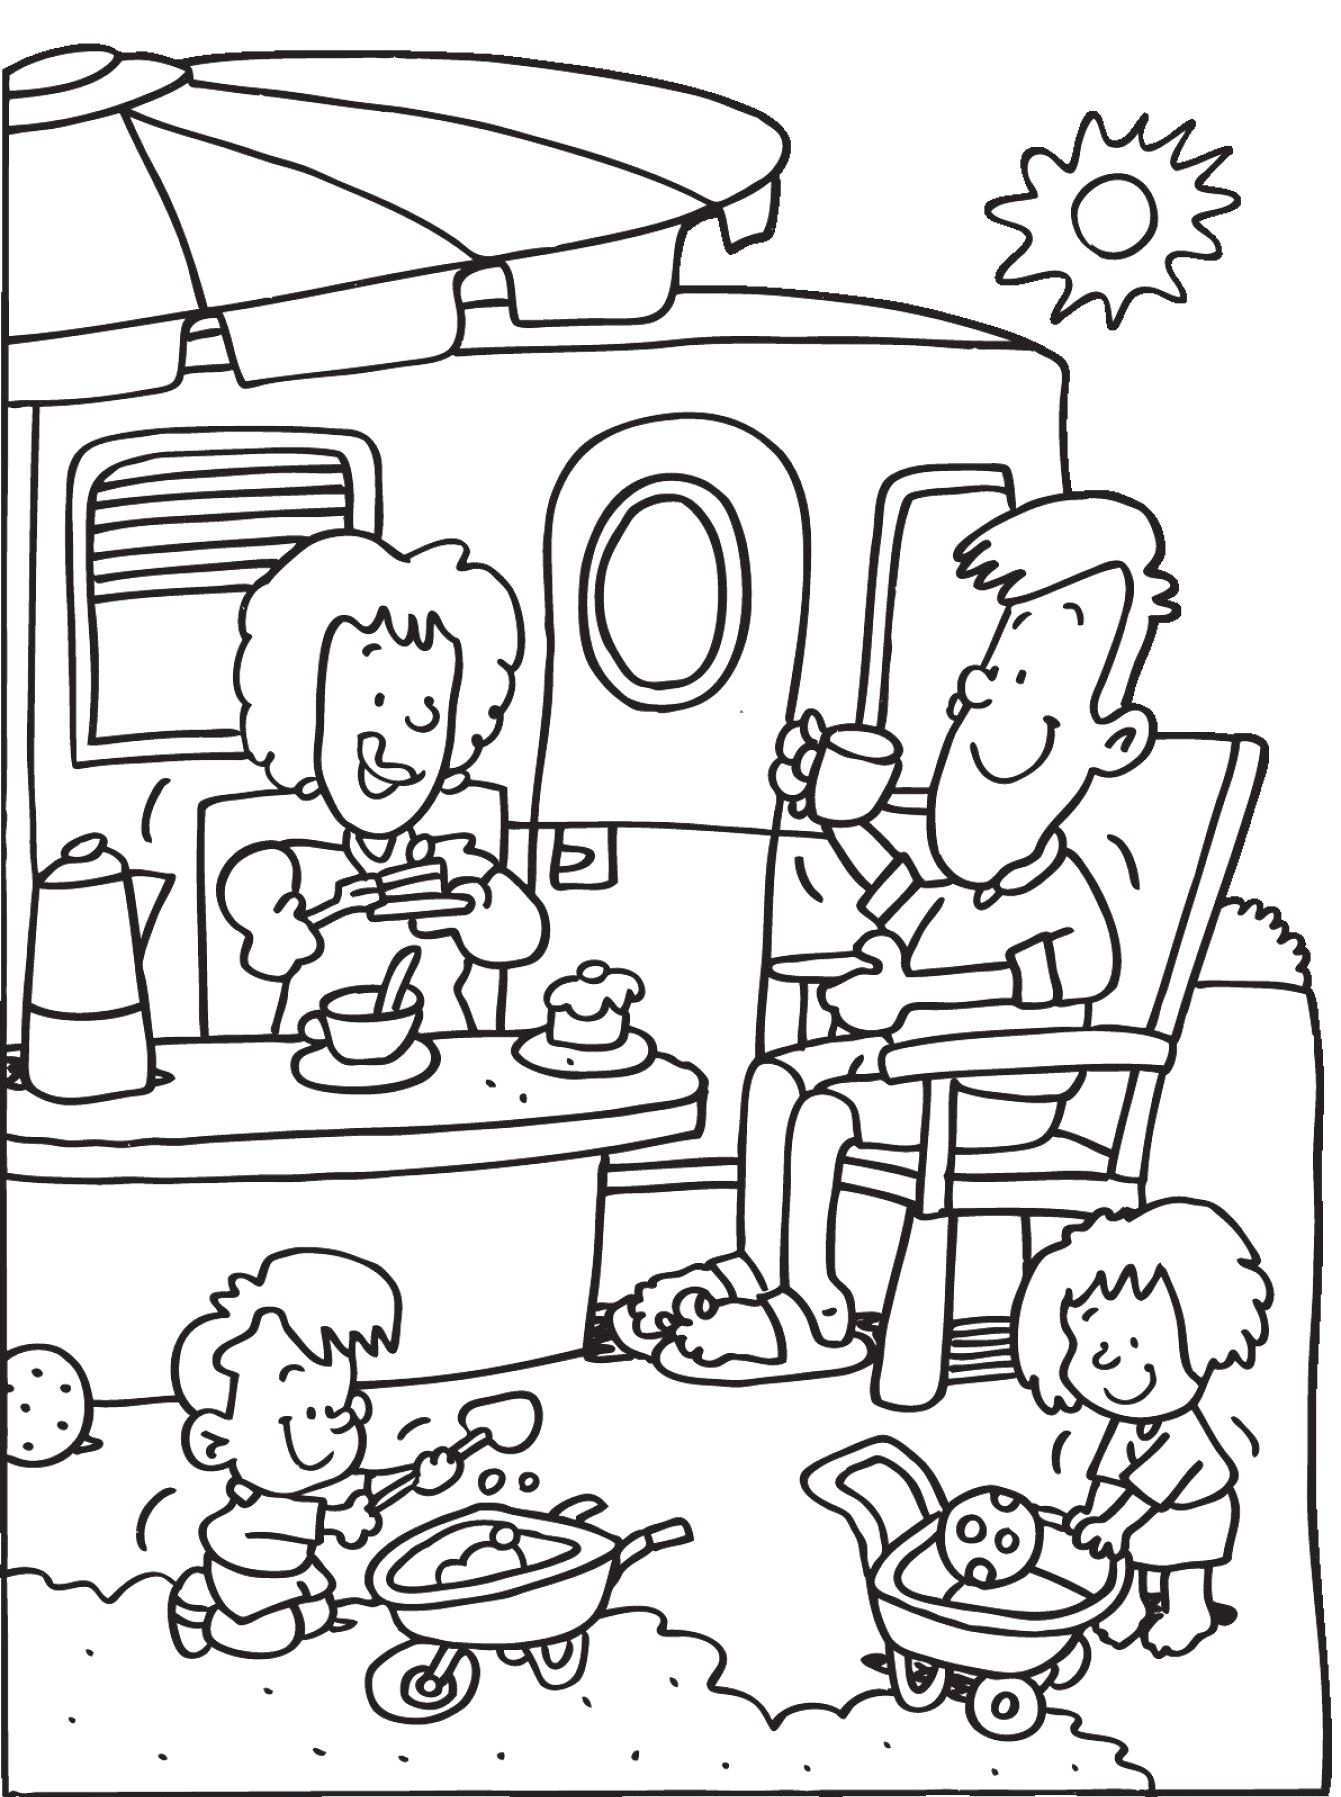 Kleurplaat Vakantie Zwembad In 2021 Summer Coloring Pages Camping Coloring Pages Colo